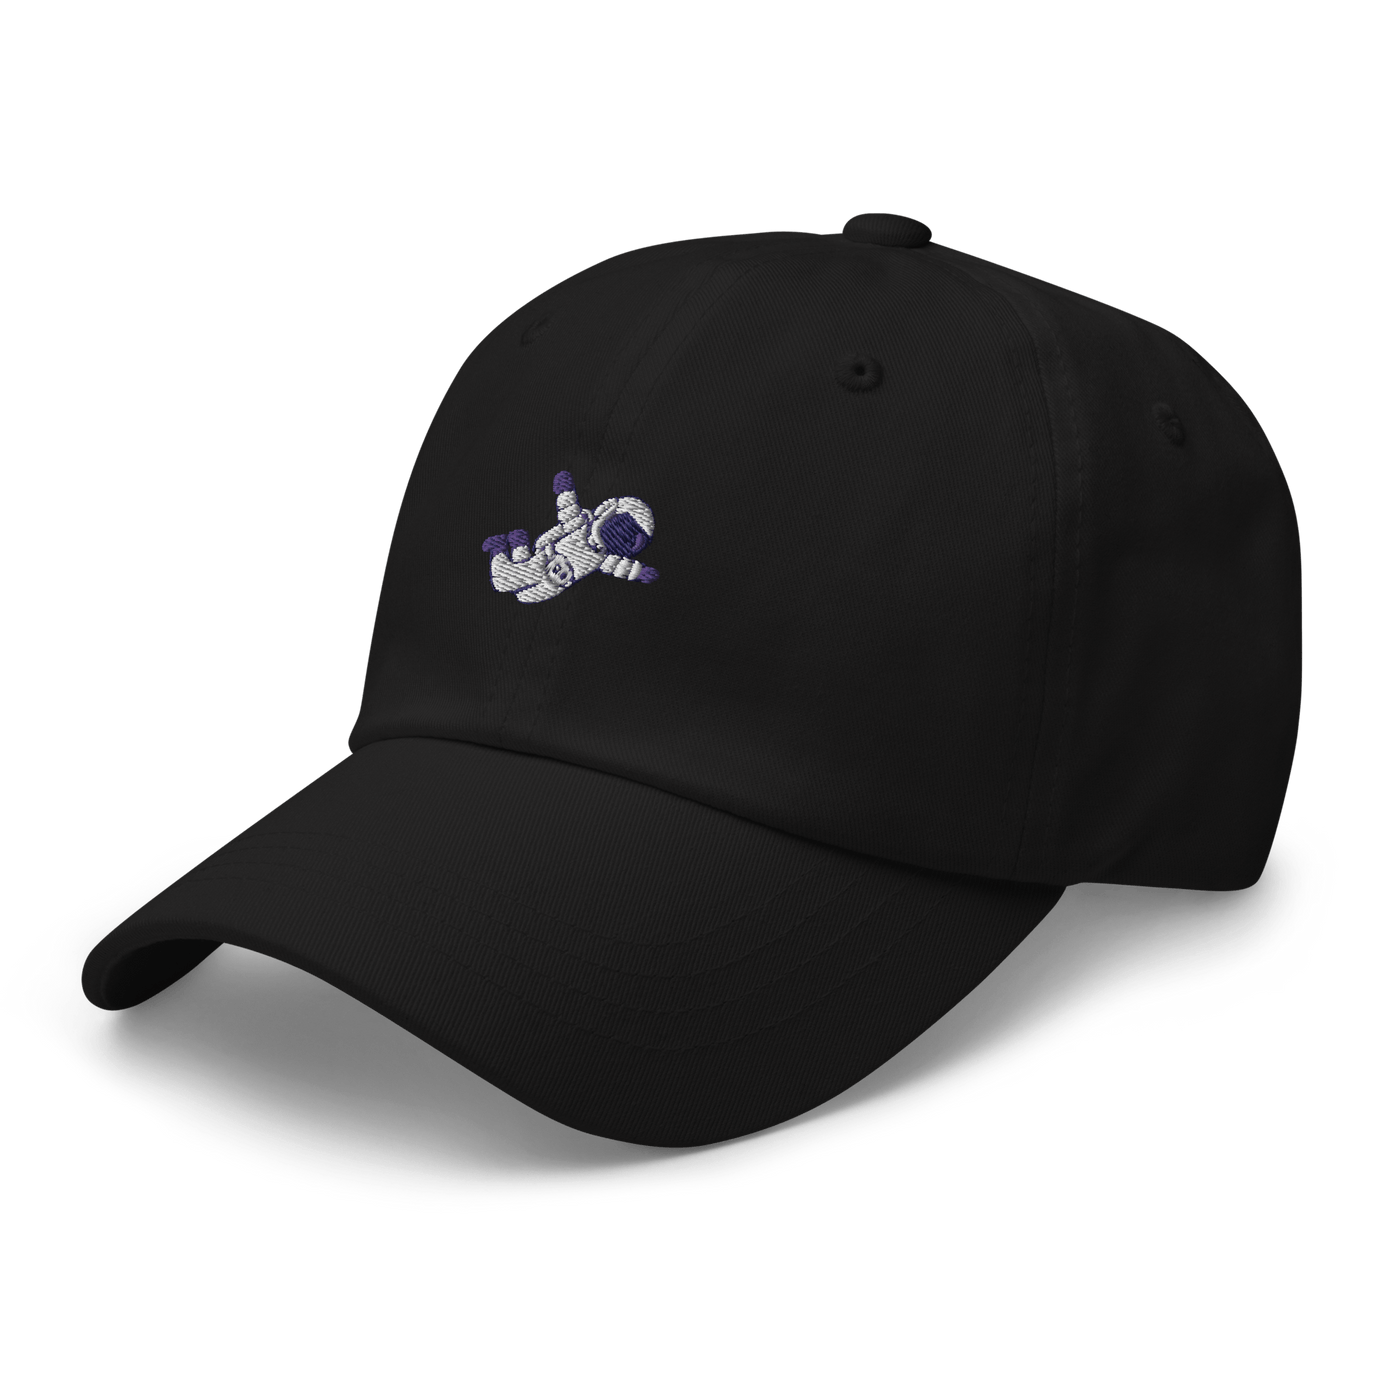 Astronaut Dad hat - Black - - Just Another Cap Store